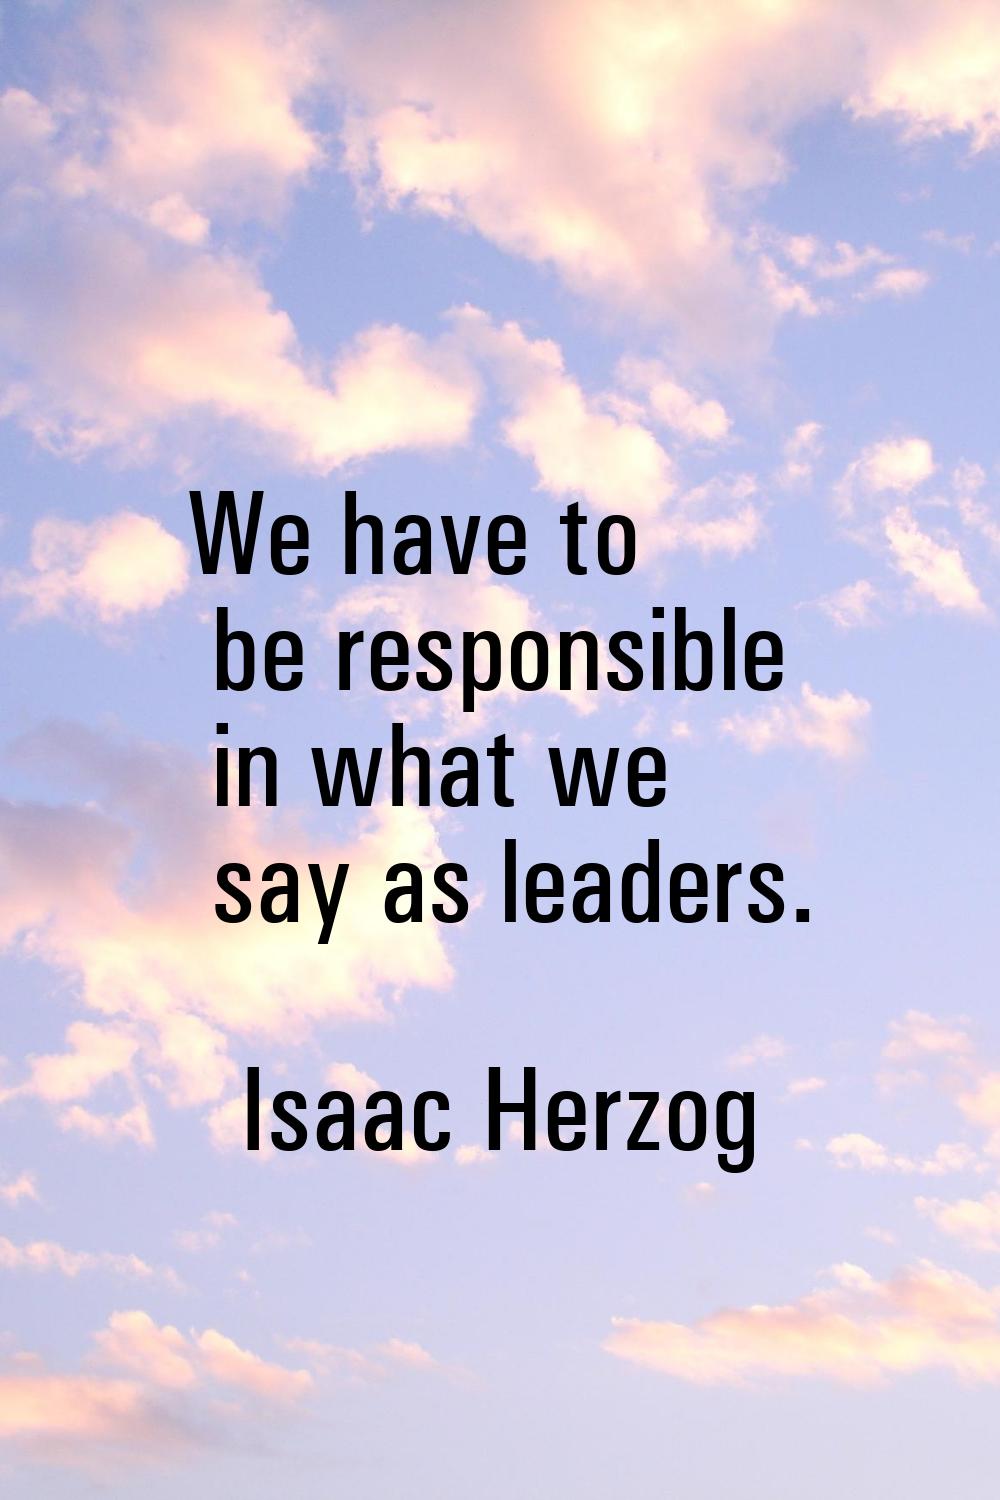 We have to be responsible in what we say as leaders.